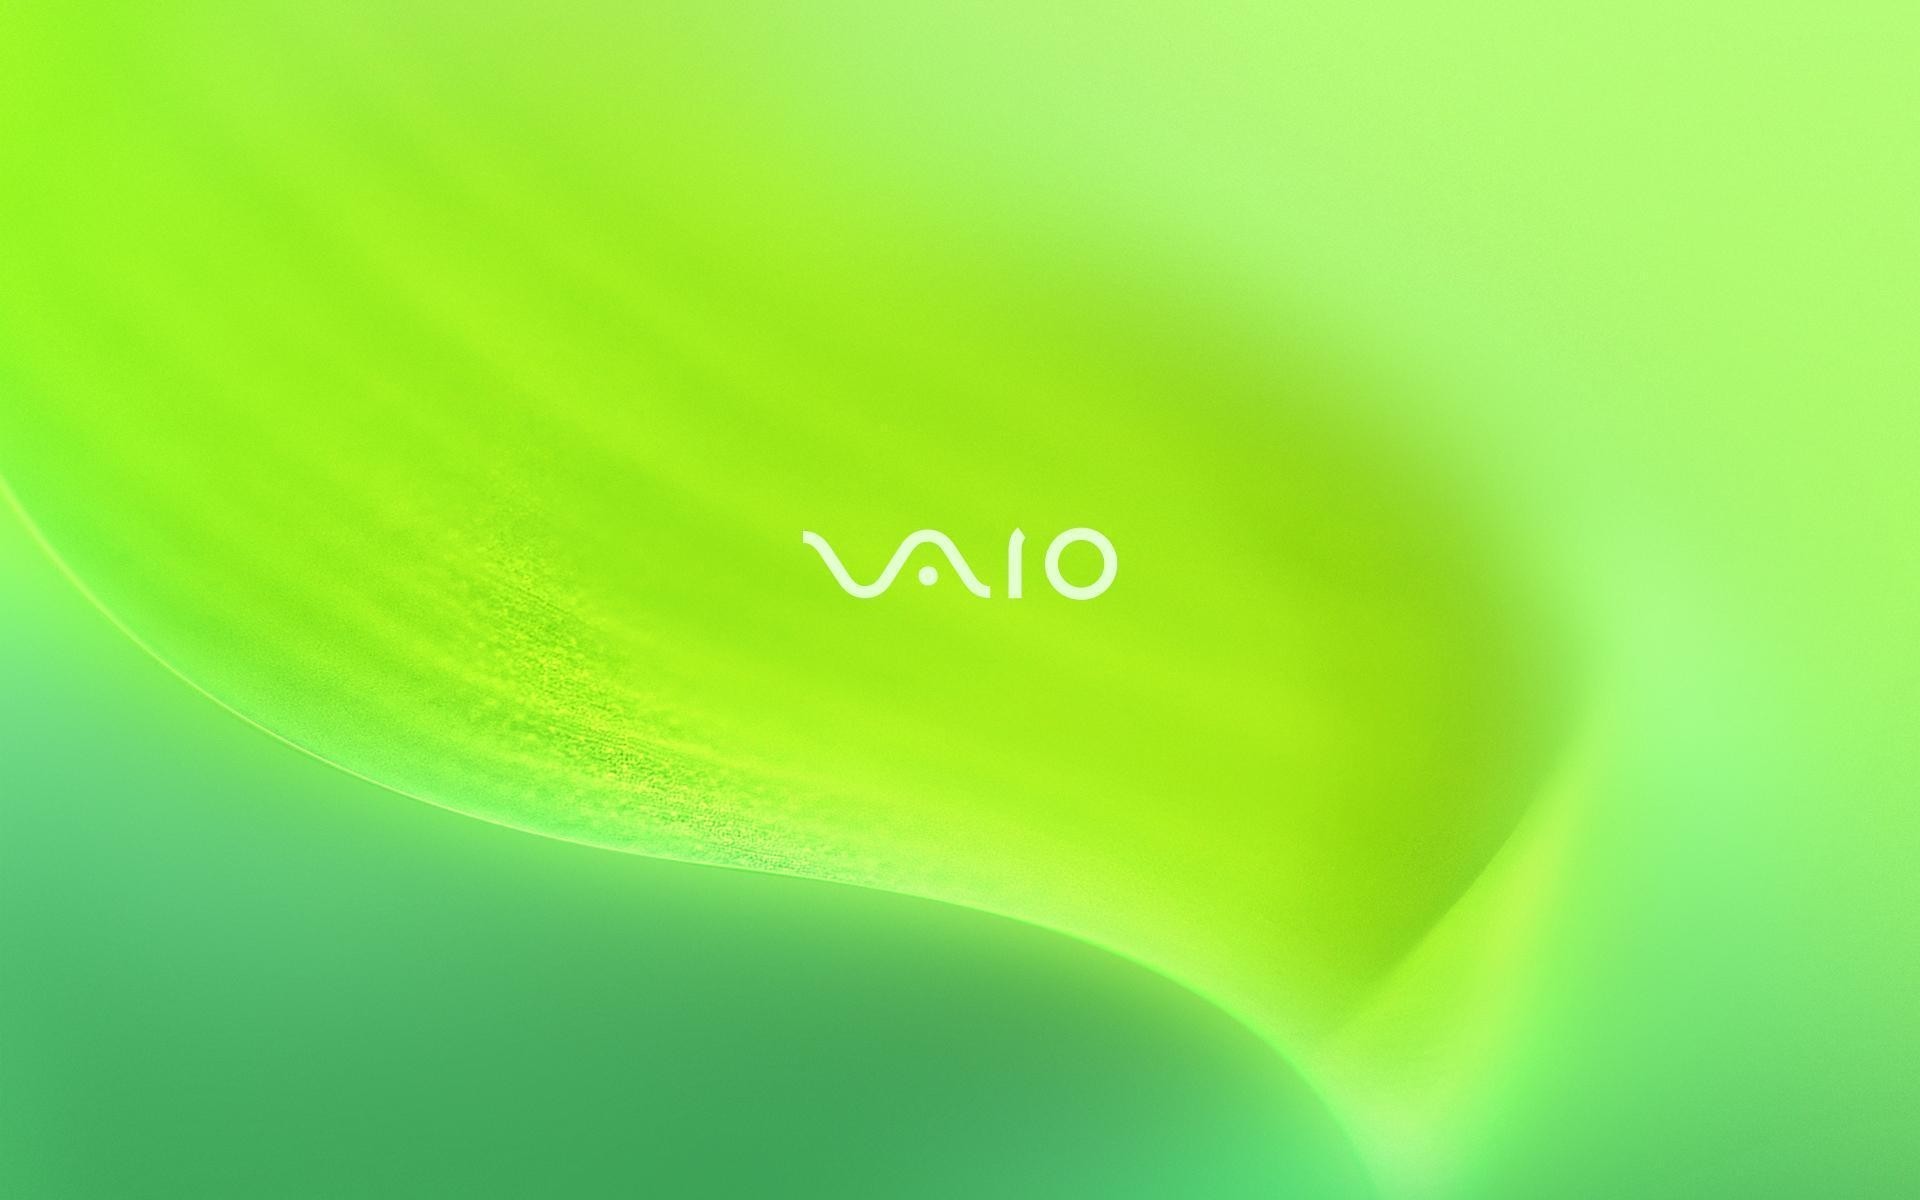 Cool Sony Vaio Phone Wallpapers